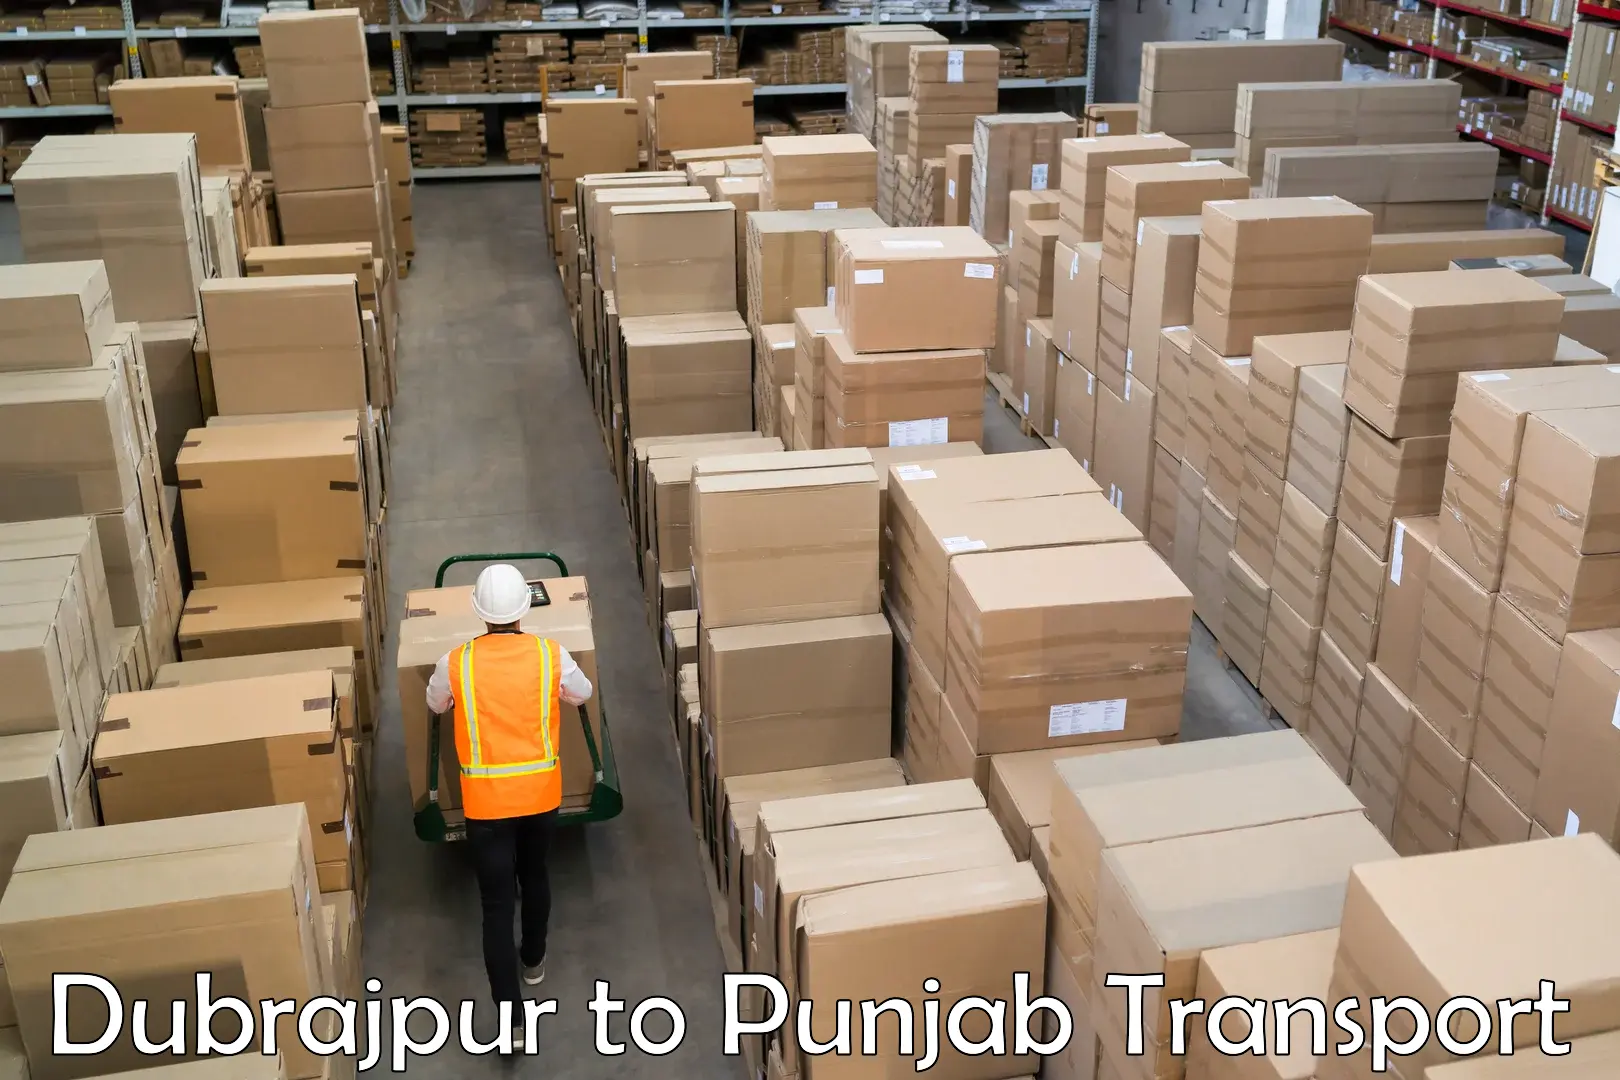 Goods delivery service Dubrajpur to Punjab